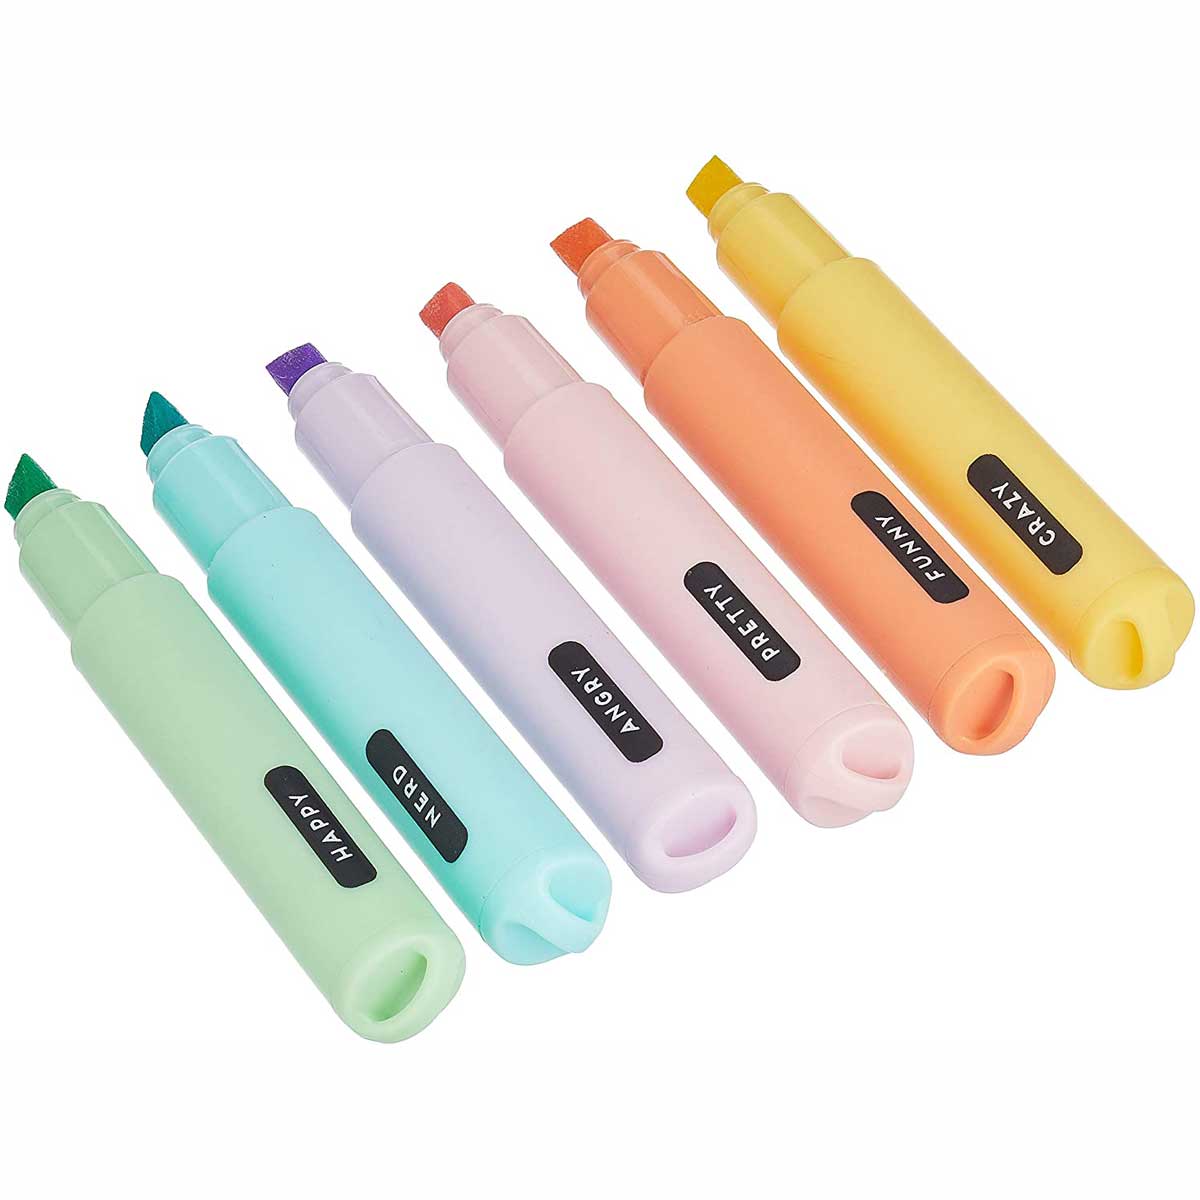 Set of 6 Mini Highlighters Legami Teddy's Style Yellow/peach/pink